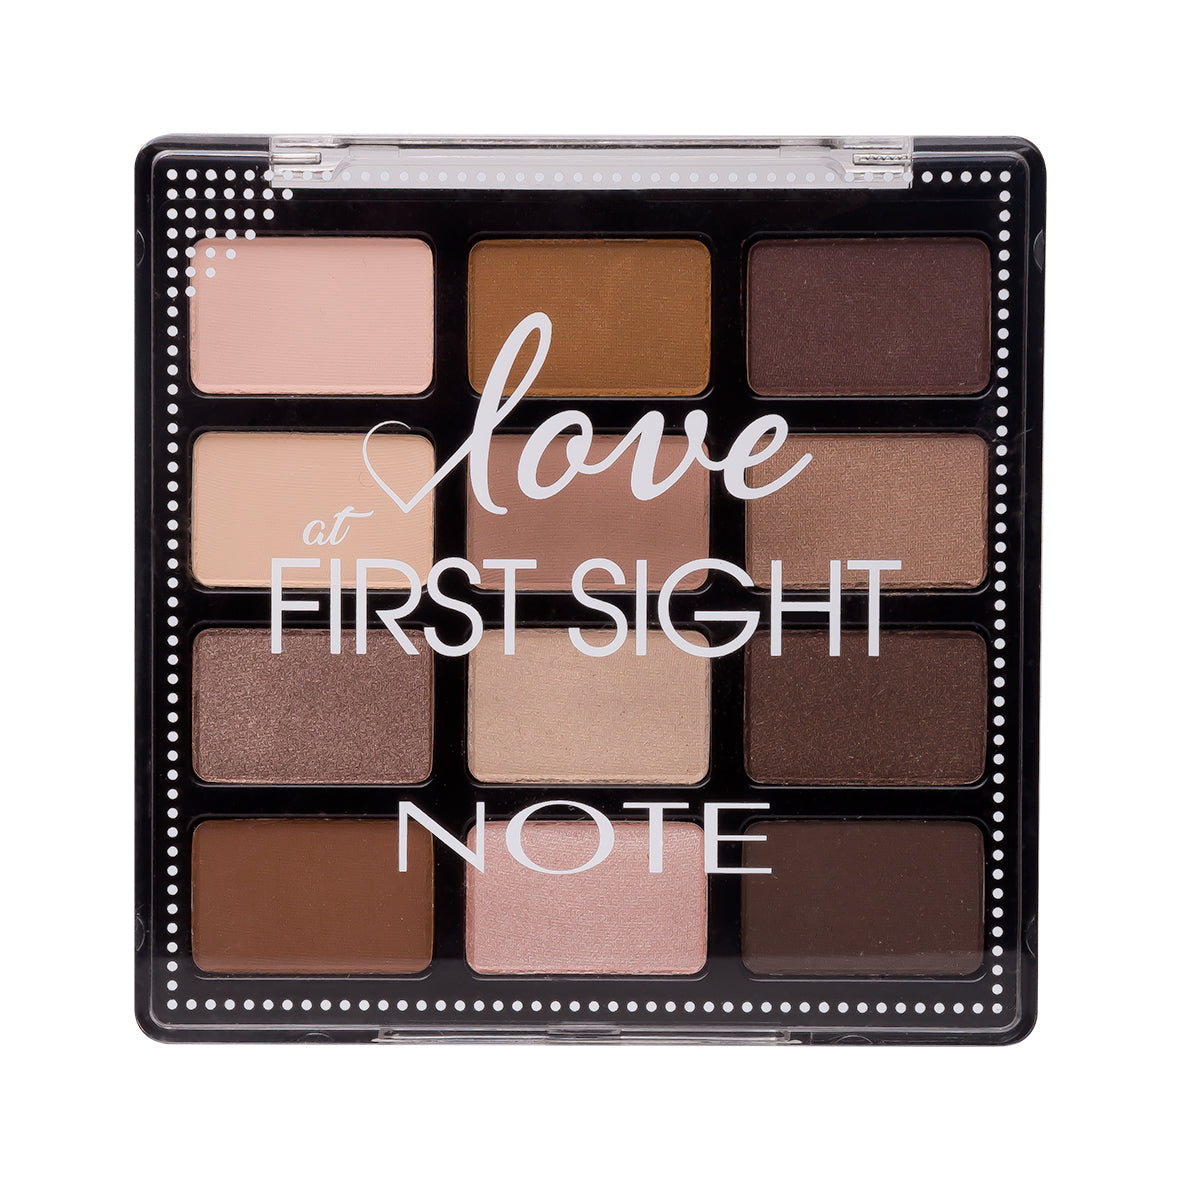 NOTE LOVE AT FIRST SIGHT EYESHADOW PALETTE | Selfish Beauty Online